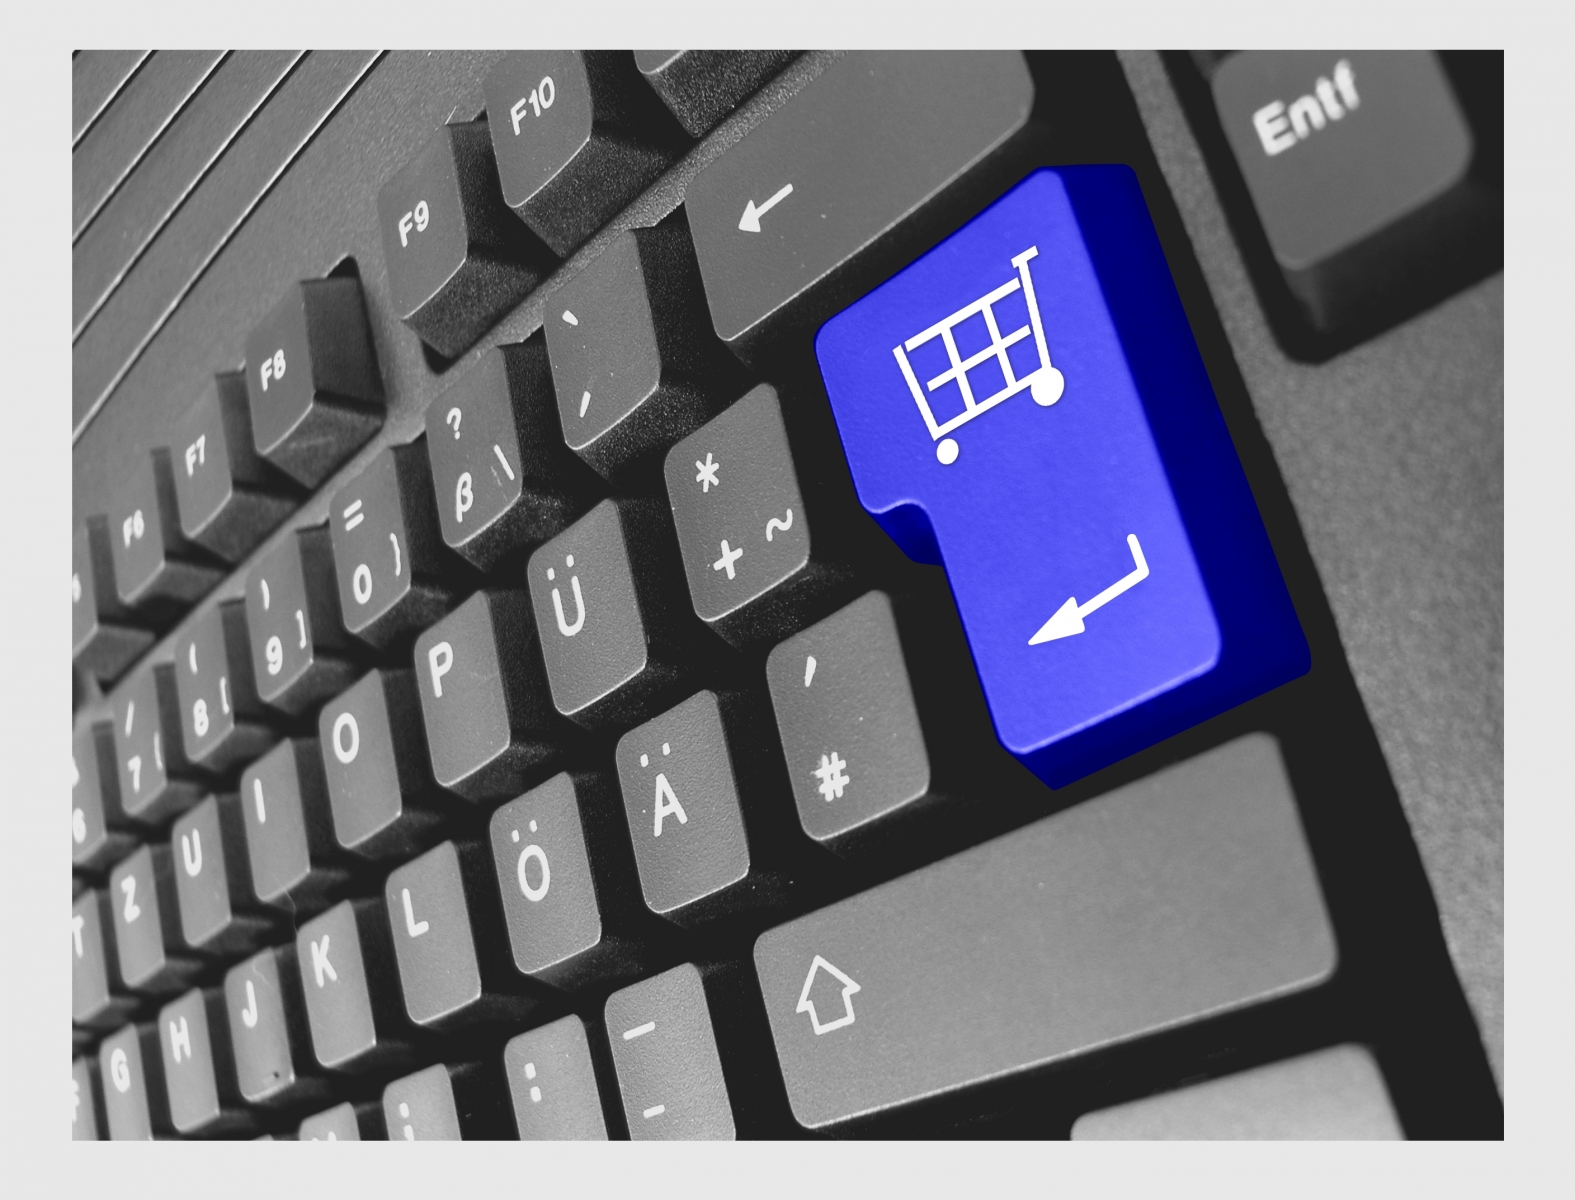 803165-special-pc-keyboard-shopping-cart